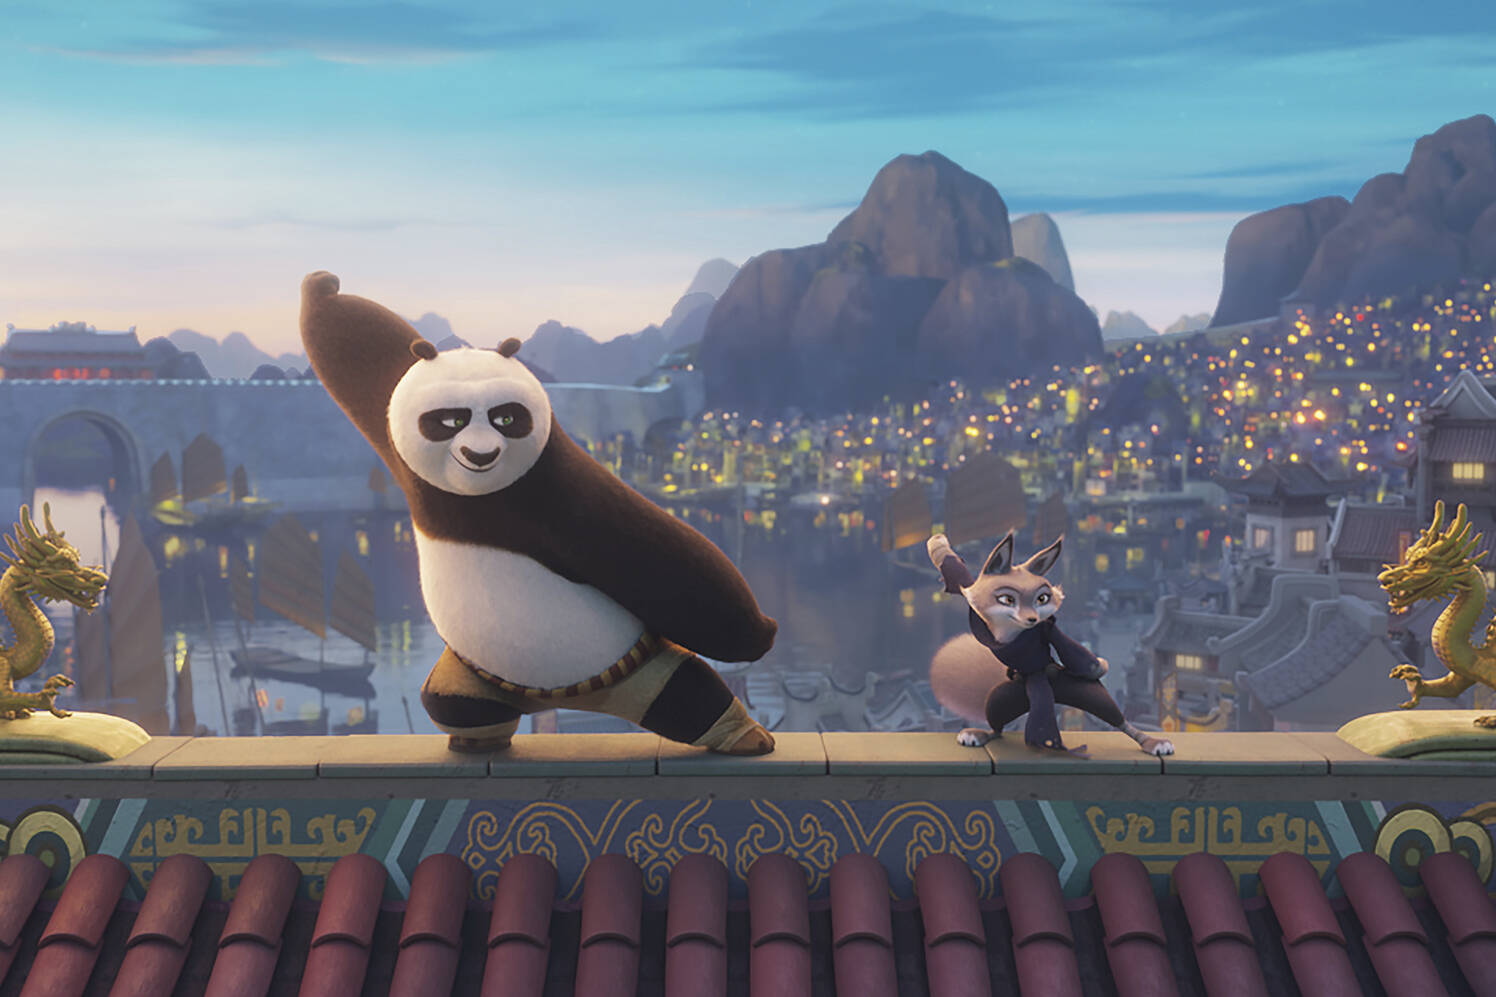 This image released by Universal Pictures shows characters Po, voiced by Jack Black, left, and Zhen, voiced by Awkwafina, in a scene from DreamWorks Animation’s “Kung Fu Panda 4.” (DreamWorks Animation/Universal Pictures via AP)